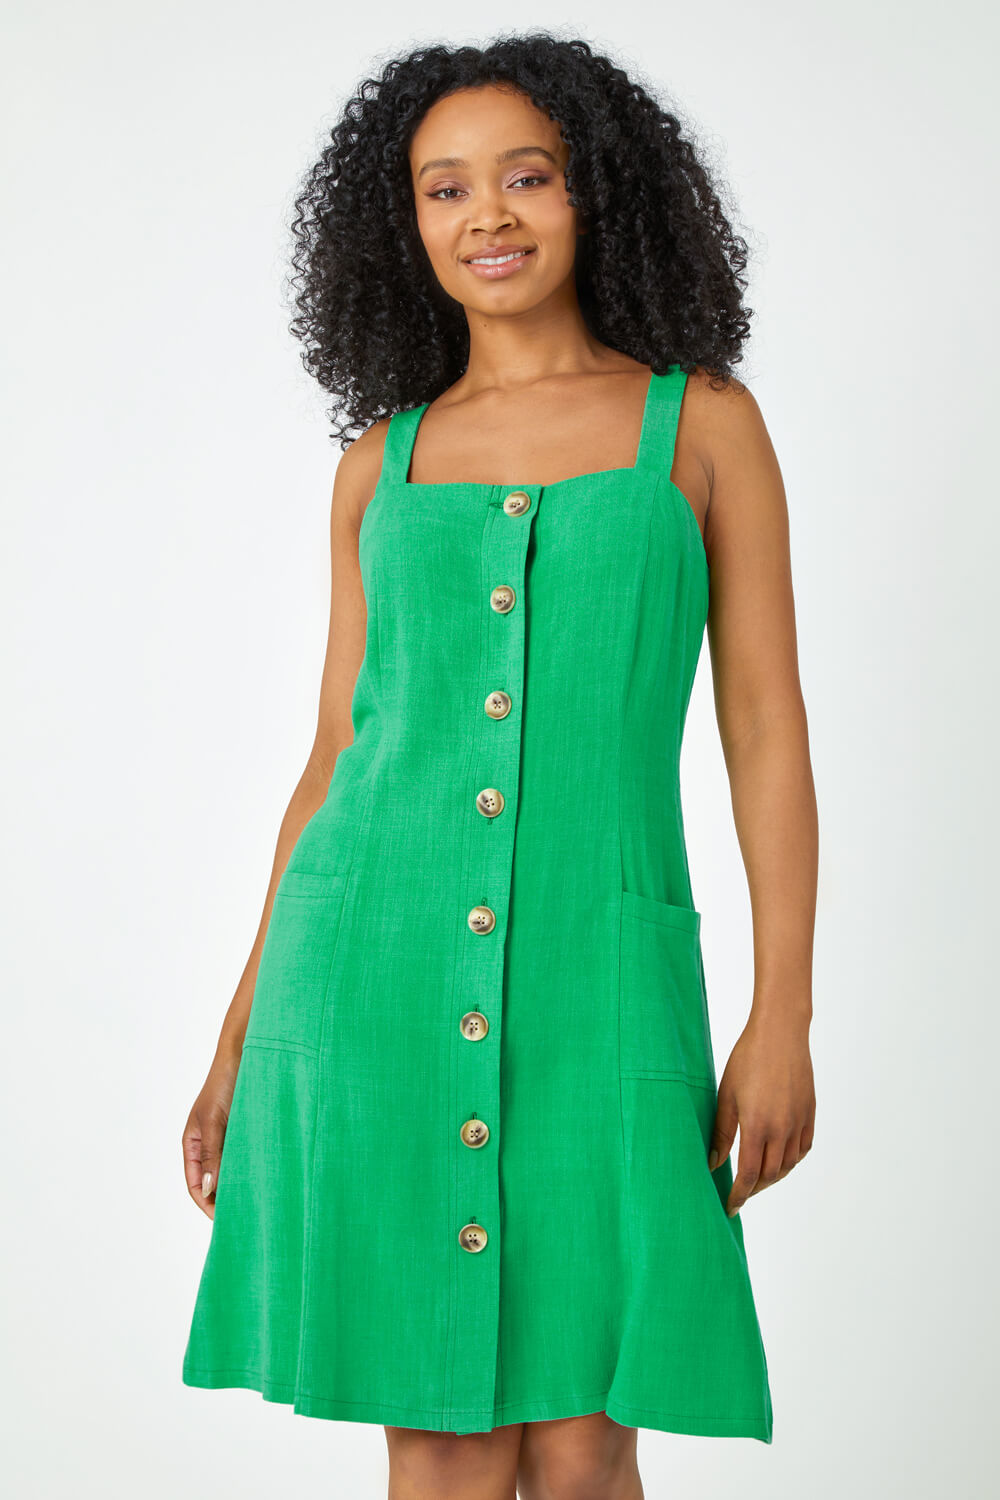 Green Petite Button Front Pocket Dress, Image 4 of 5